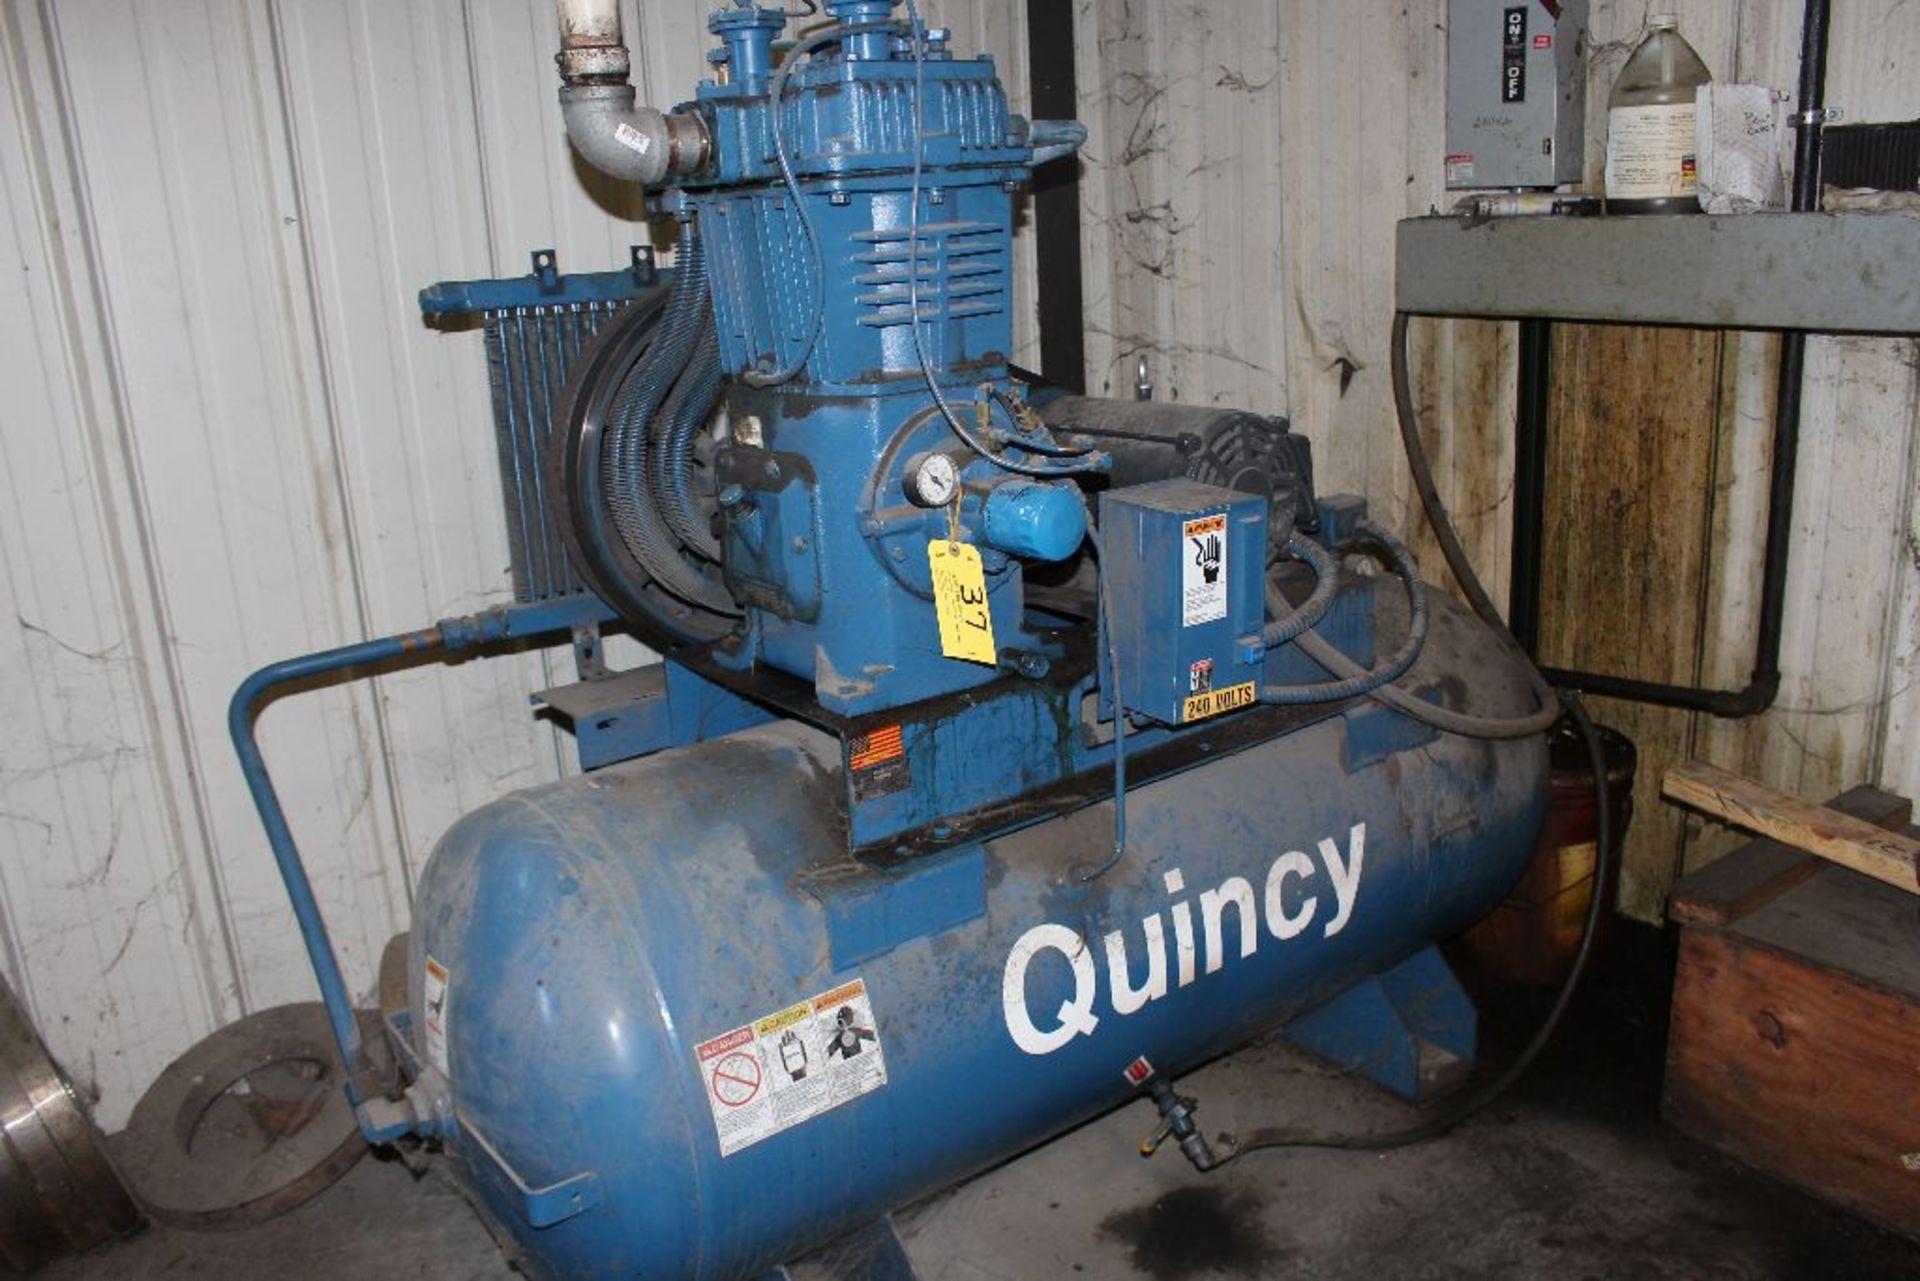 Quincy air compressor, model MQR350ST10HP, s/n 5102528, 10 hp, 208/230/460 volt 3-phase, mounted